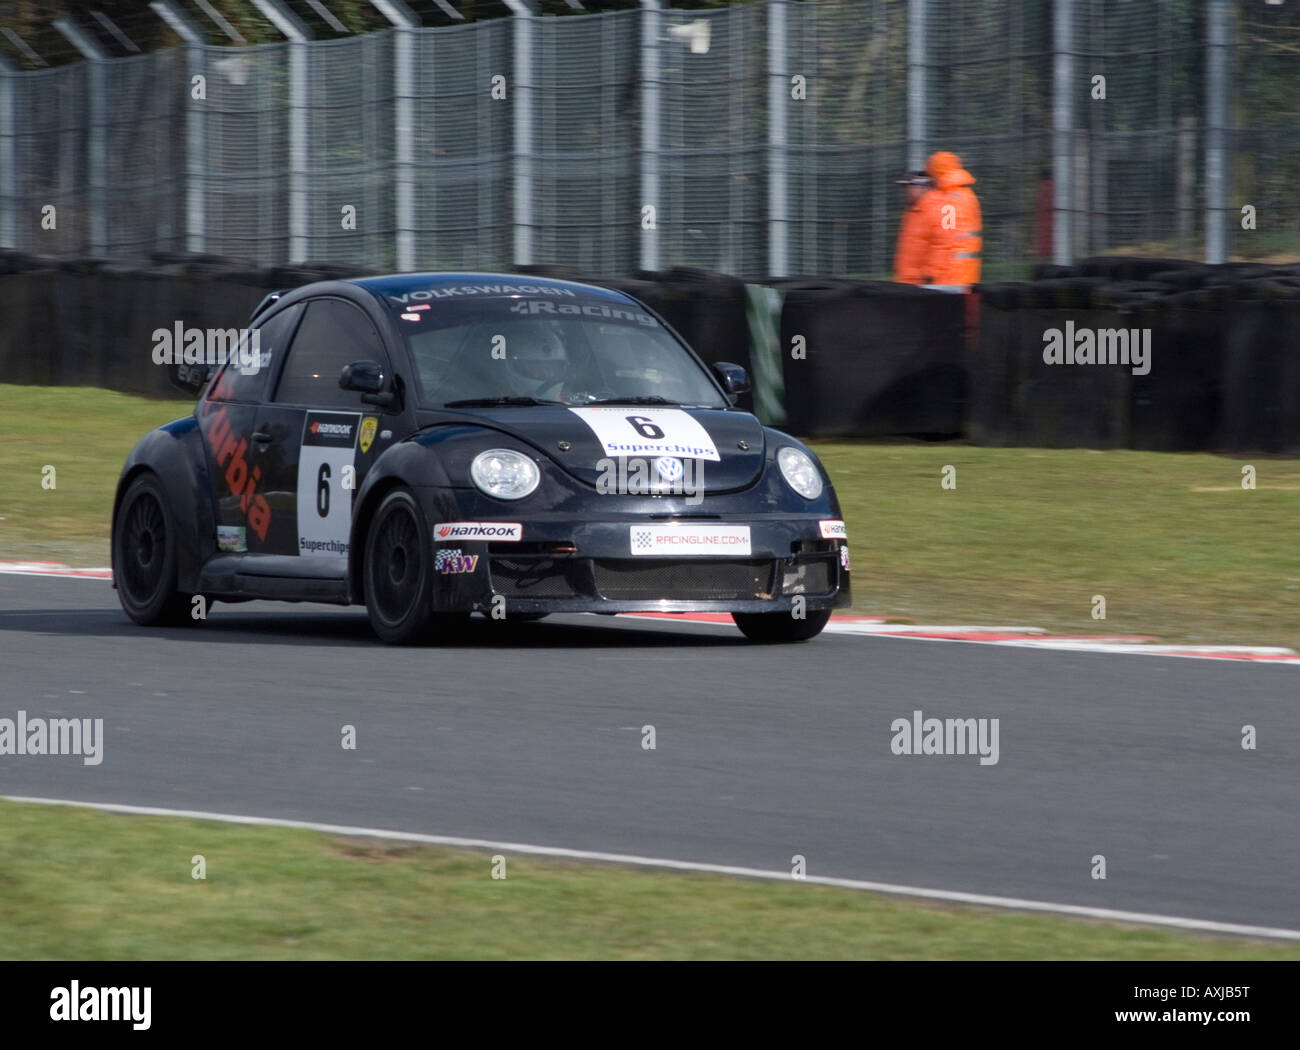 Volkswagen Beetle RSi Race Car in Volkswagen Racing Cup at Oulton Park Motor Race Circuit Cheshire England United Kingdom Stock Photo